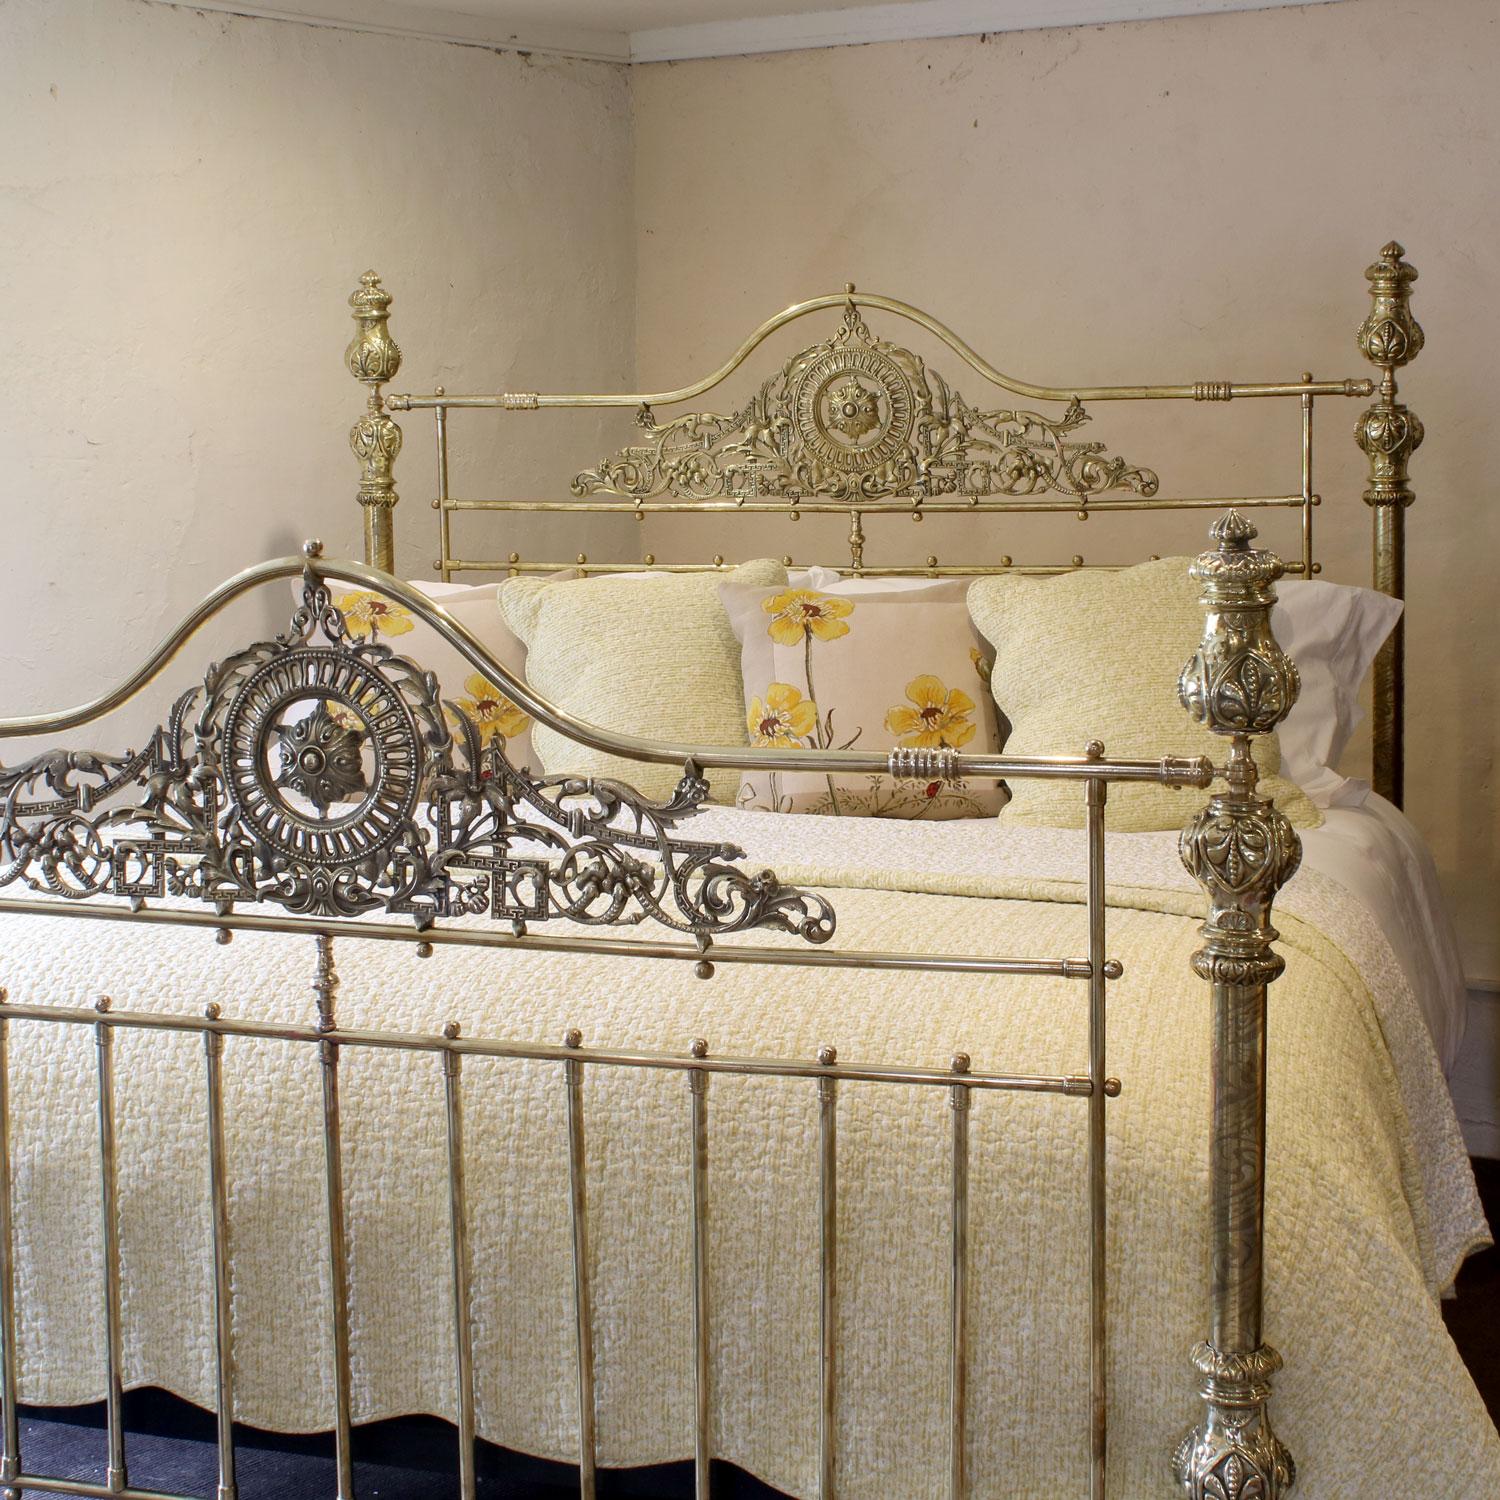 A superb all brass 6ft wide antique bed with serpentine brass top rails, decorative central brass castings, rare etched posts and ornate brass fittings.

Originally manufactured in Birmingham, circa 1880, this bed was made for export and was